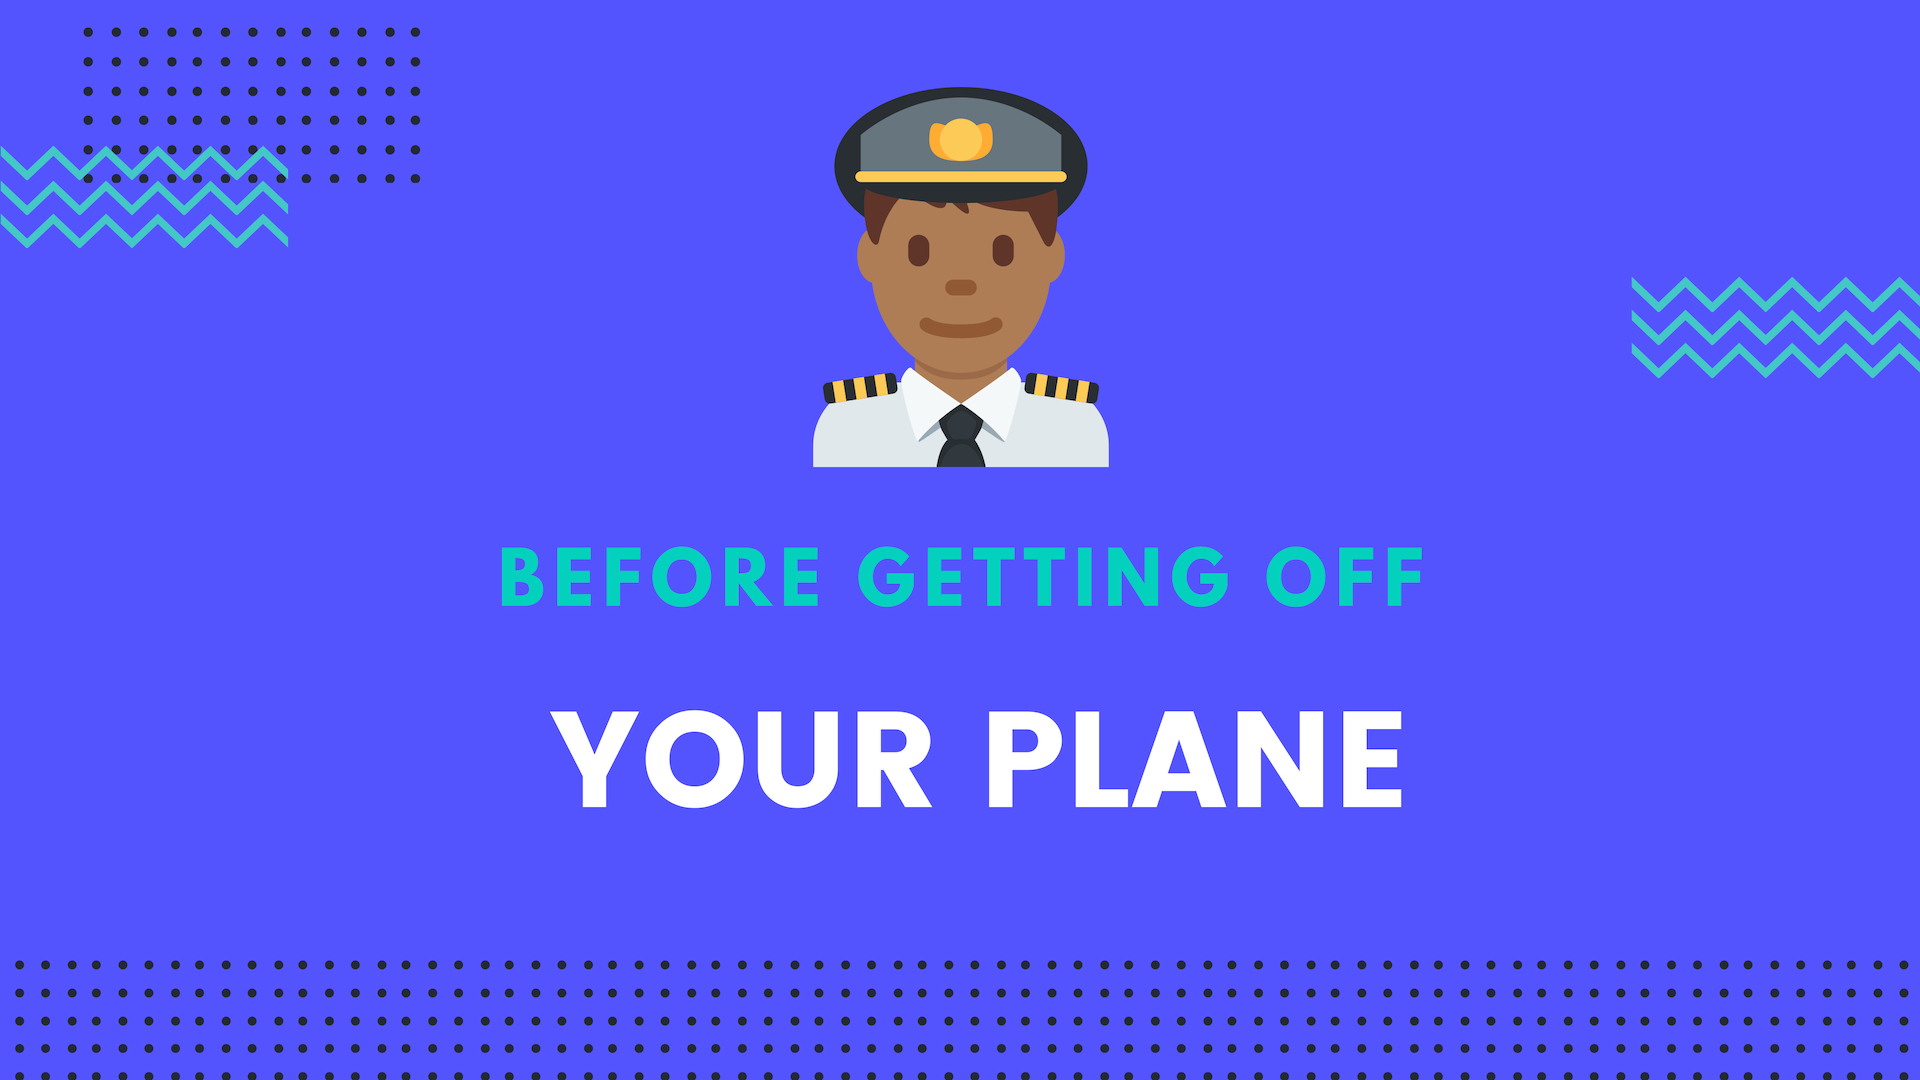 Before getting off your plane